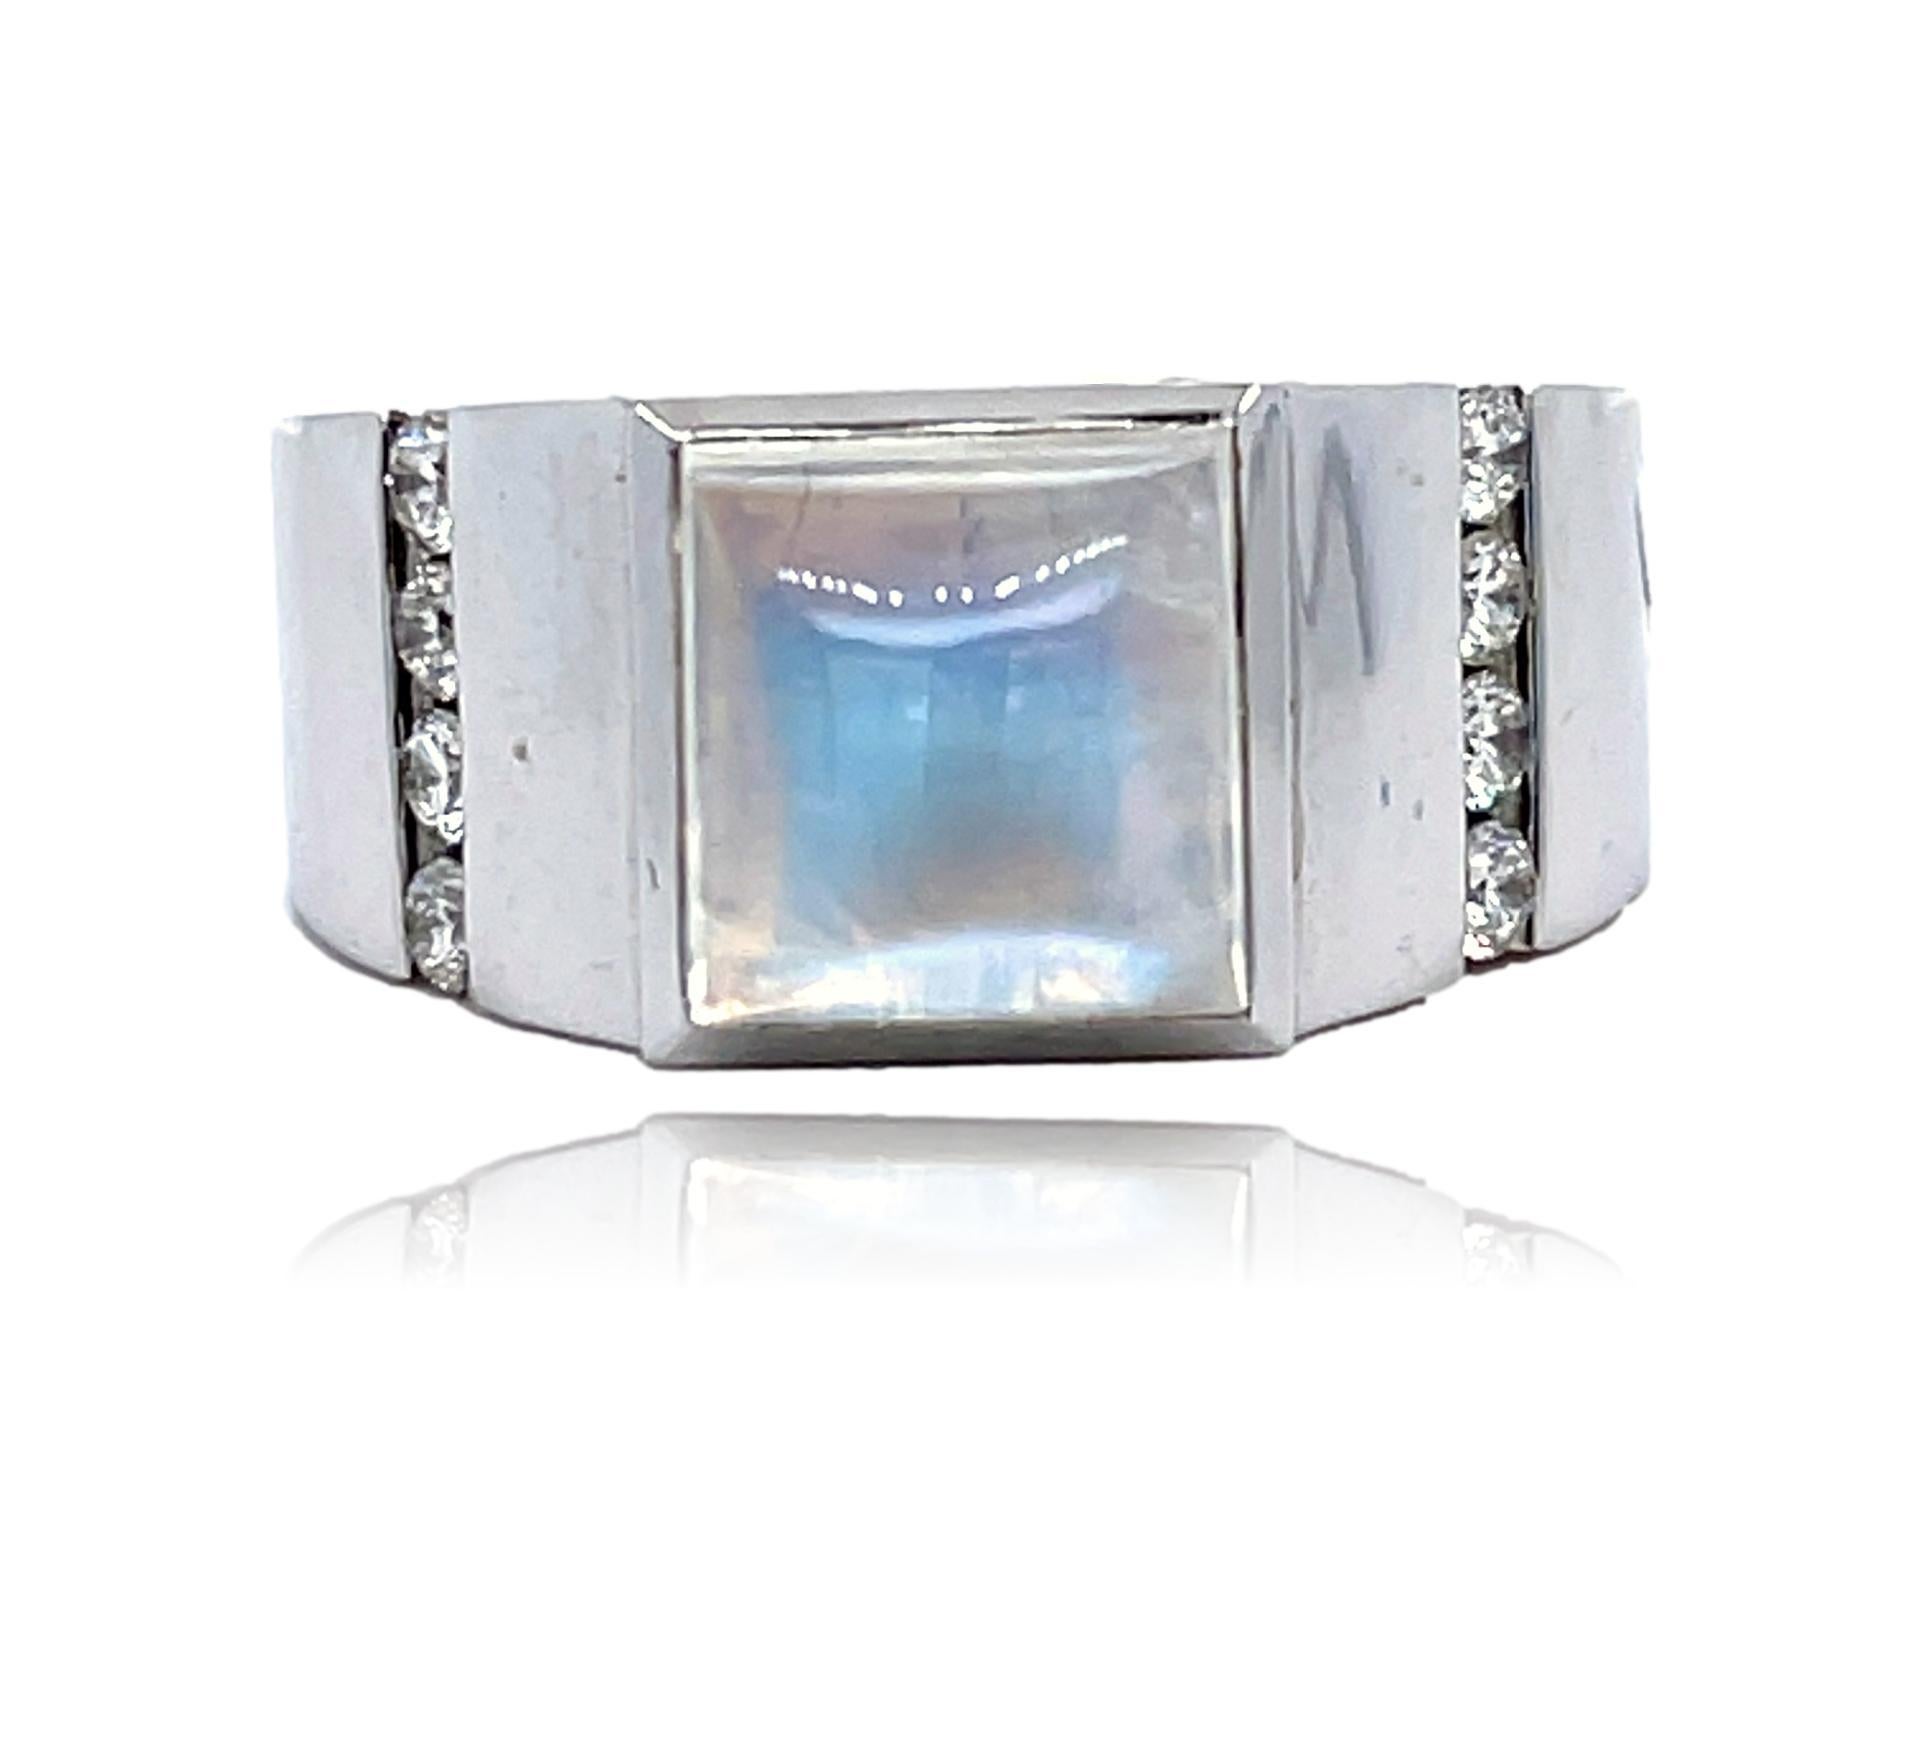 This unique Men's ring has a vibrant Moonstone center with brilliant cut diamonds along both sides and is set in 14K white gold. It comes in a beautiful box ready for the perfect gift!

14KW:            9.0 gms
Moonstone wt:    6.06 cts
Diamond:    